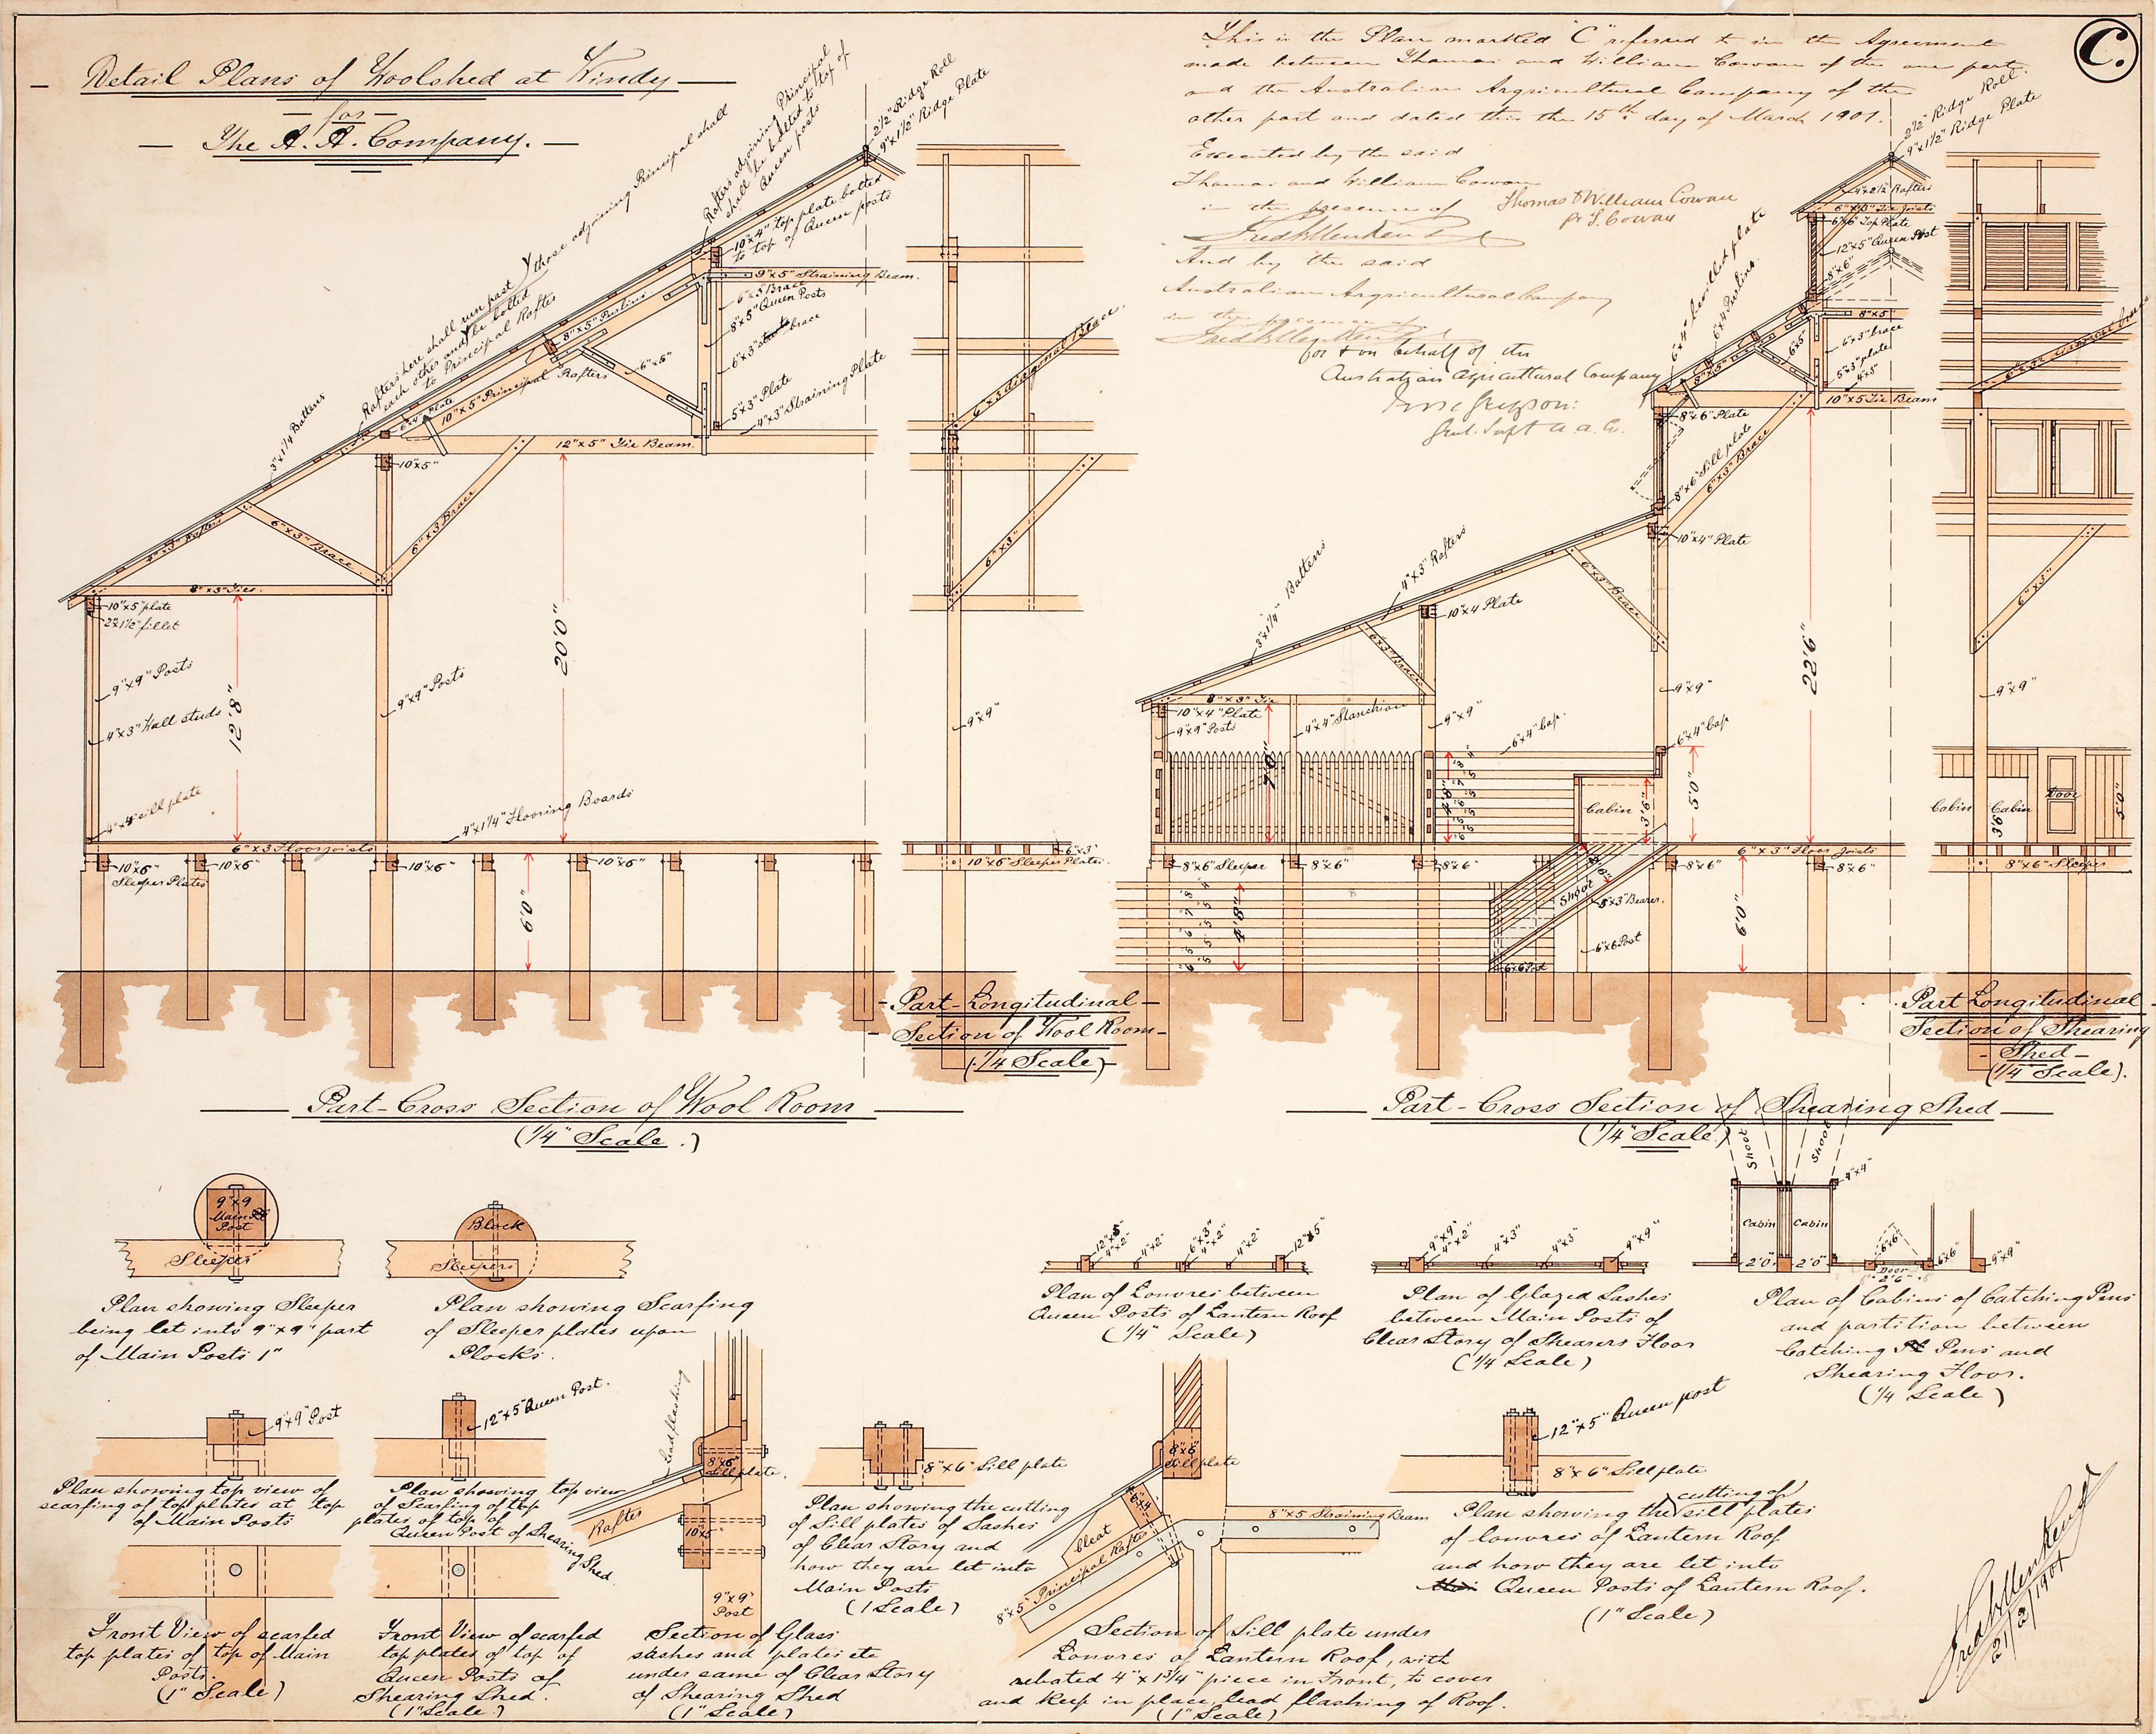 Plan of the woolshed at Windy Station, Warrah Estate, Liverpool Plains, New South Wales, 21 February 1901 (1-464-2). 